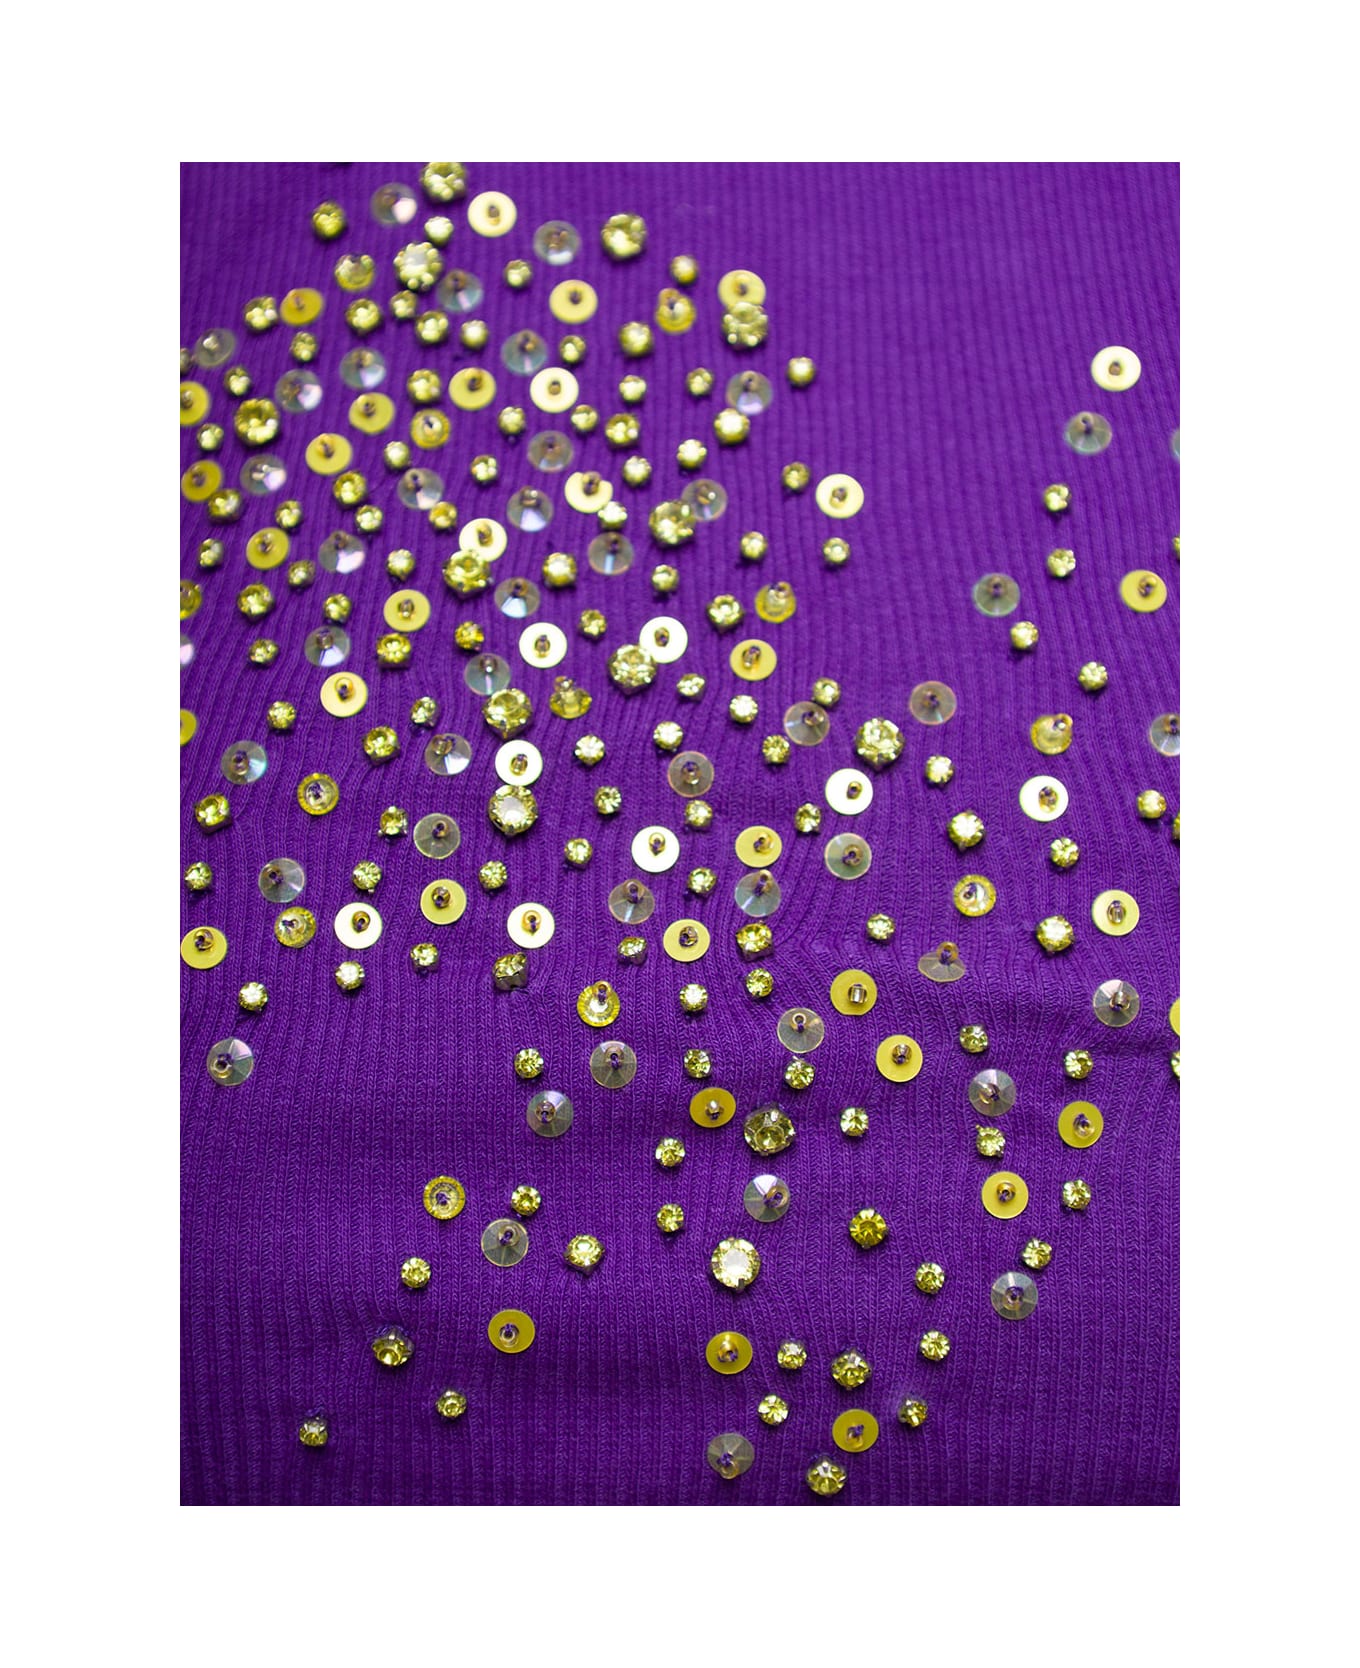 Des Phemmes Purple Ribbed Tank Top With Paillettes Embroidery In Stretch Cotton Woman - Violet